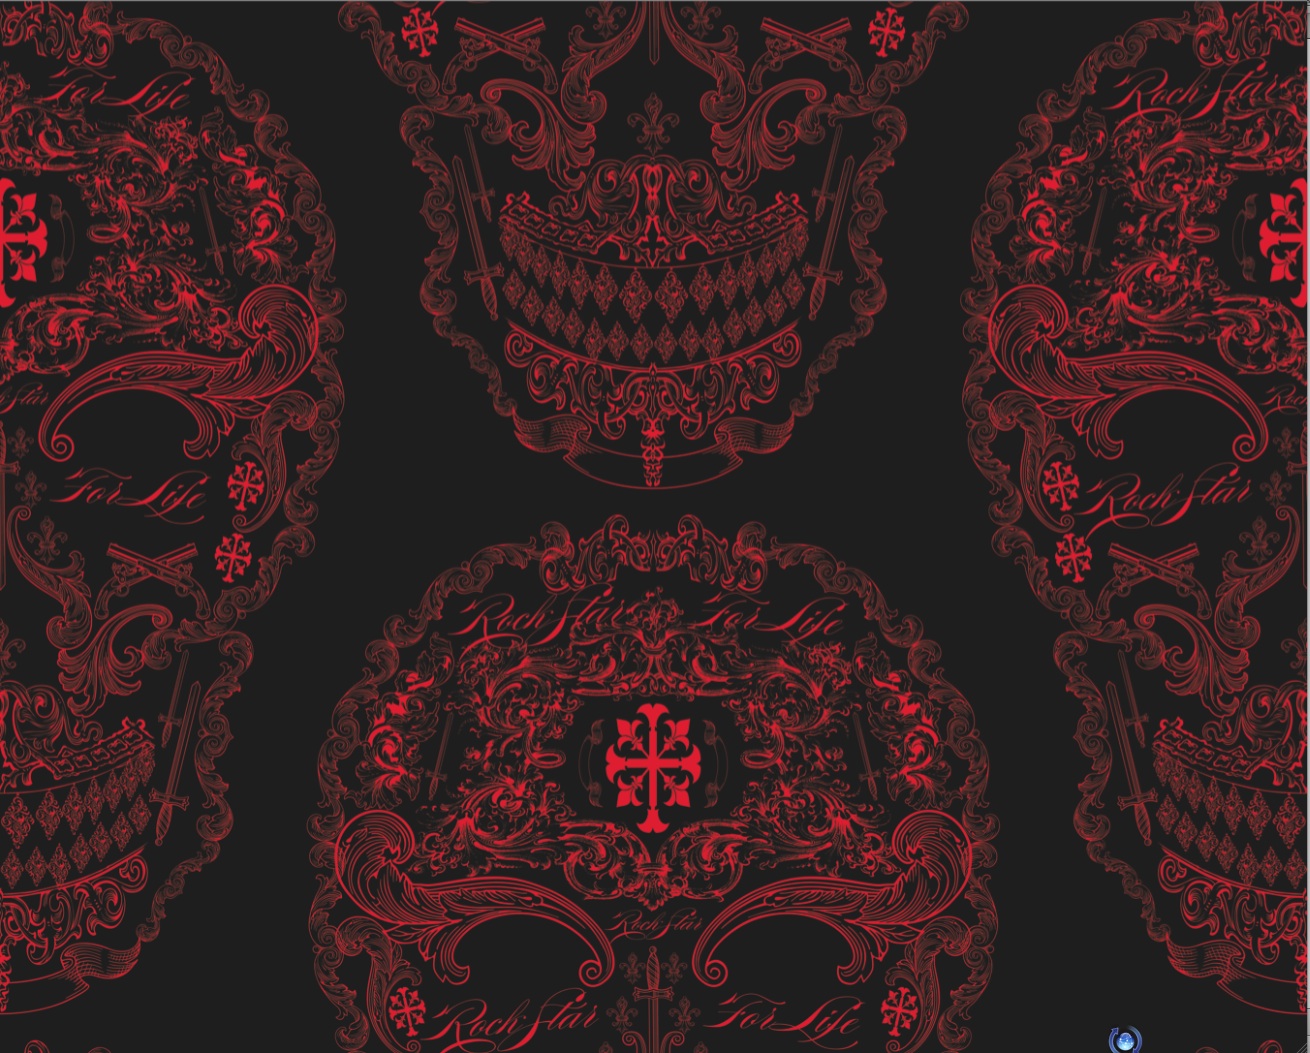 Other Skull Wallpaper But Not Ones That Have Incorporated The Skulls